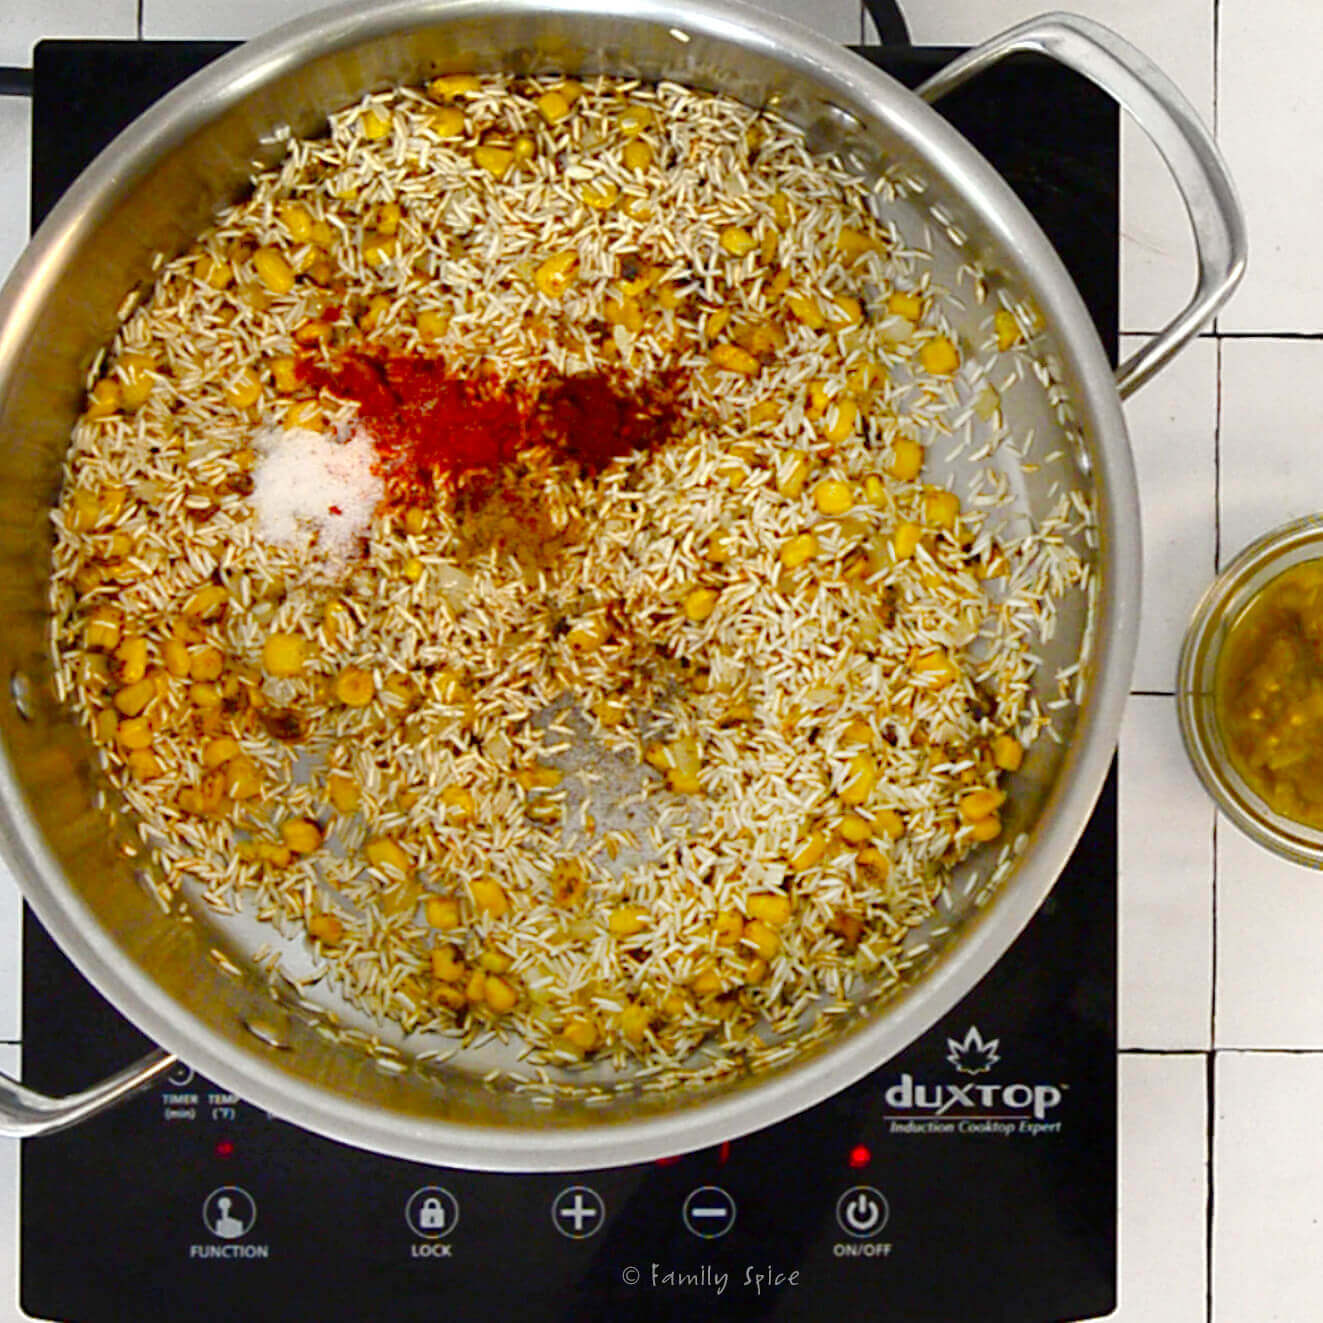 A stainless pot with sautéed onions, corn rice and spices in it